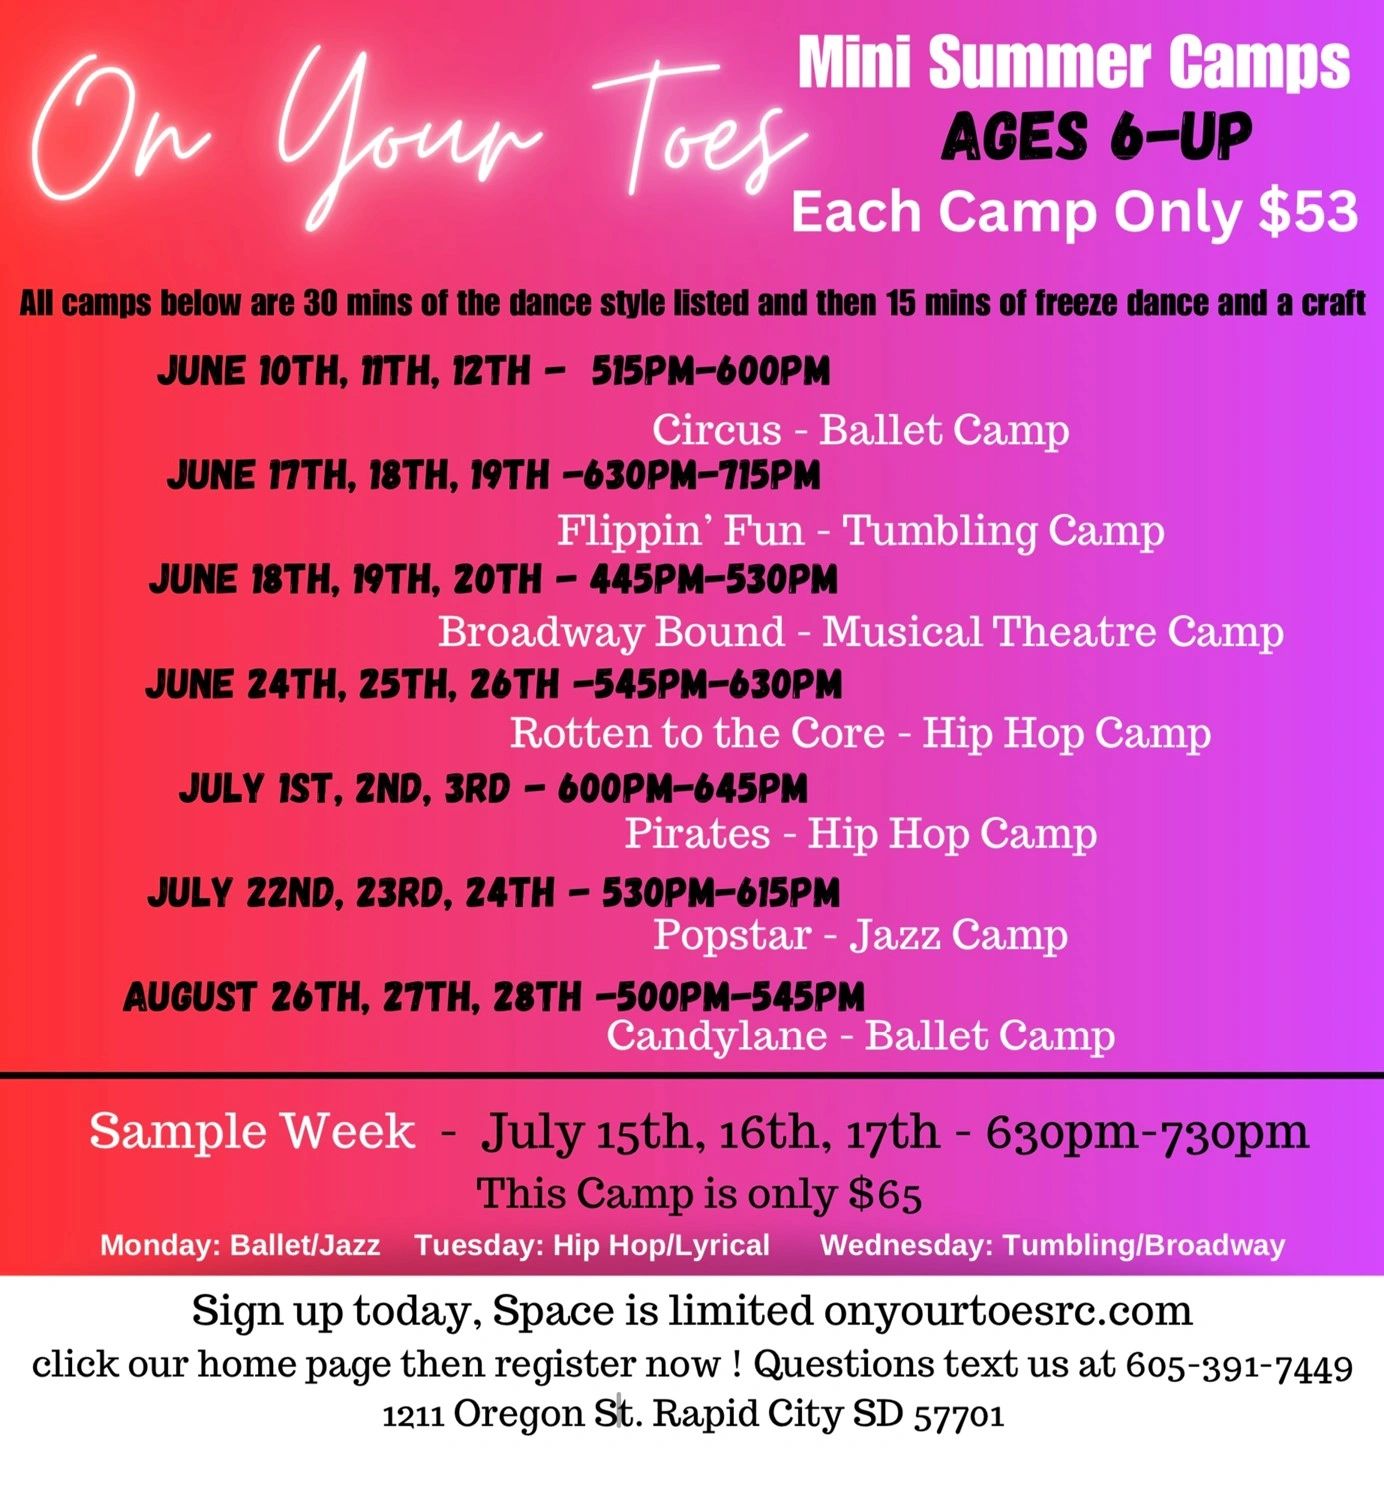 On Your Toes Dance School Mini Summer Camps for ages 6 and up.